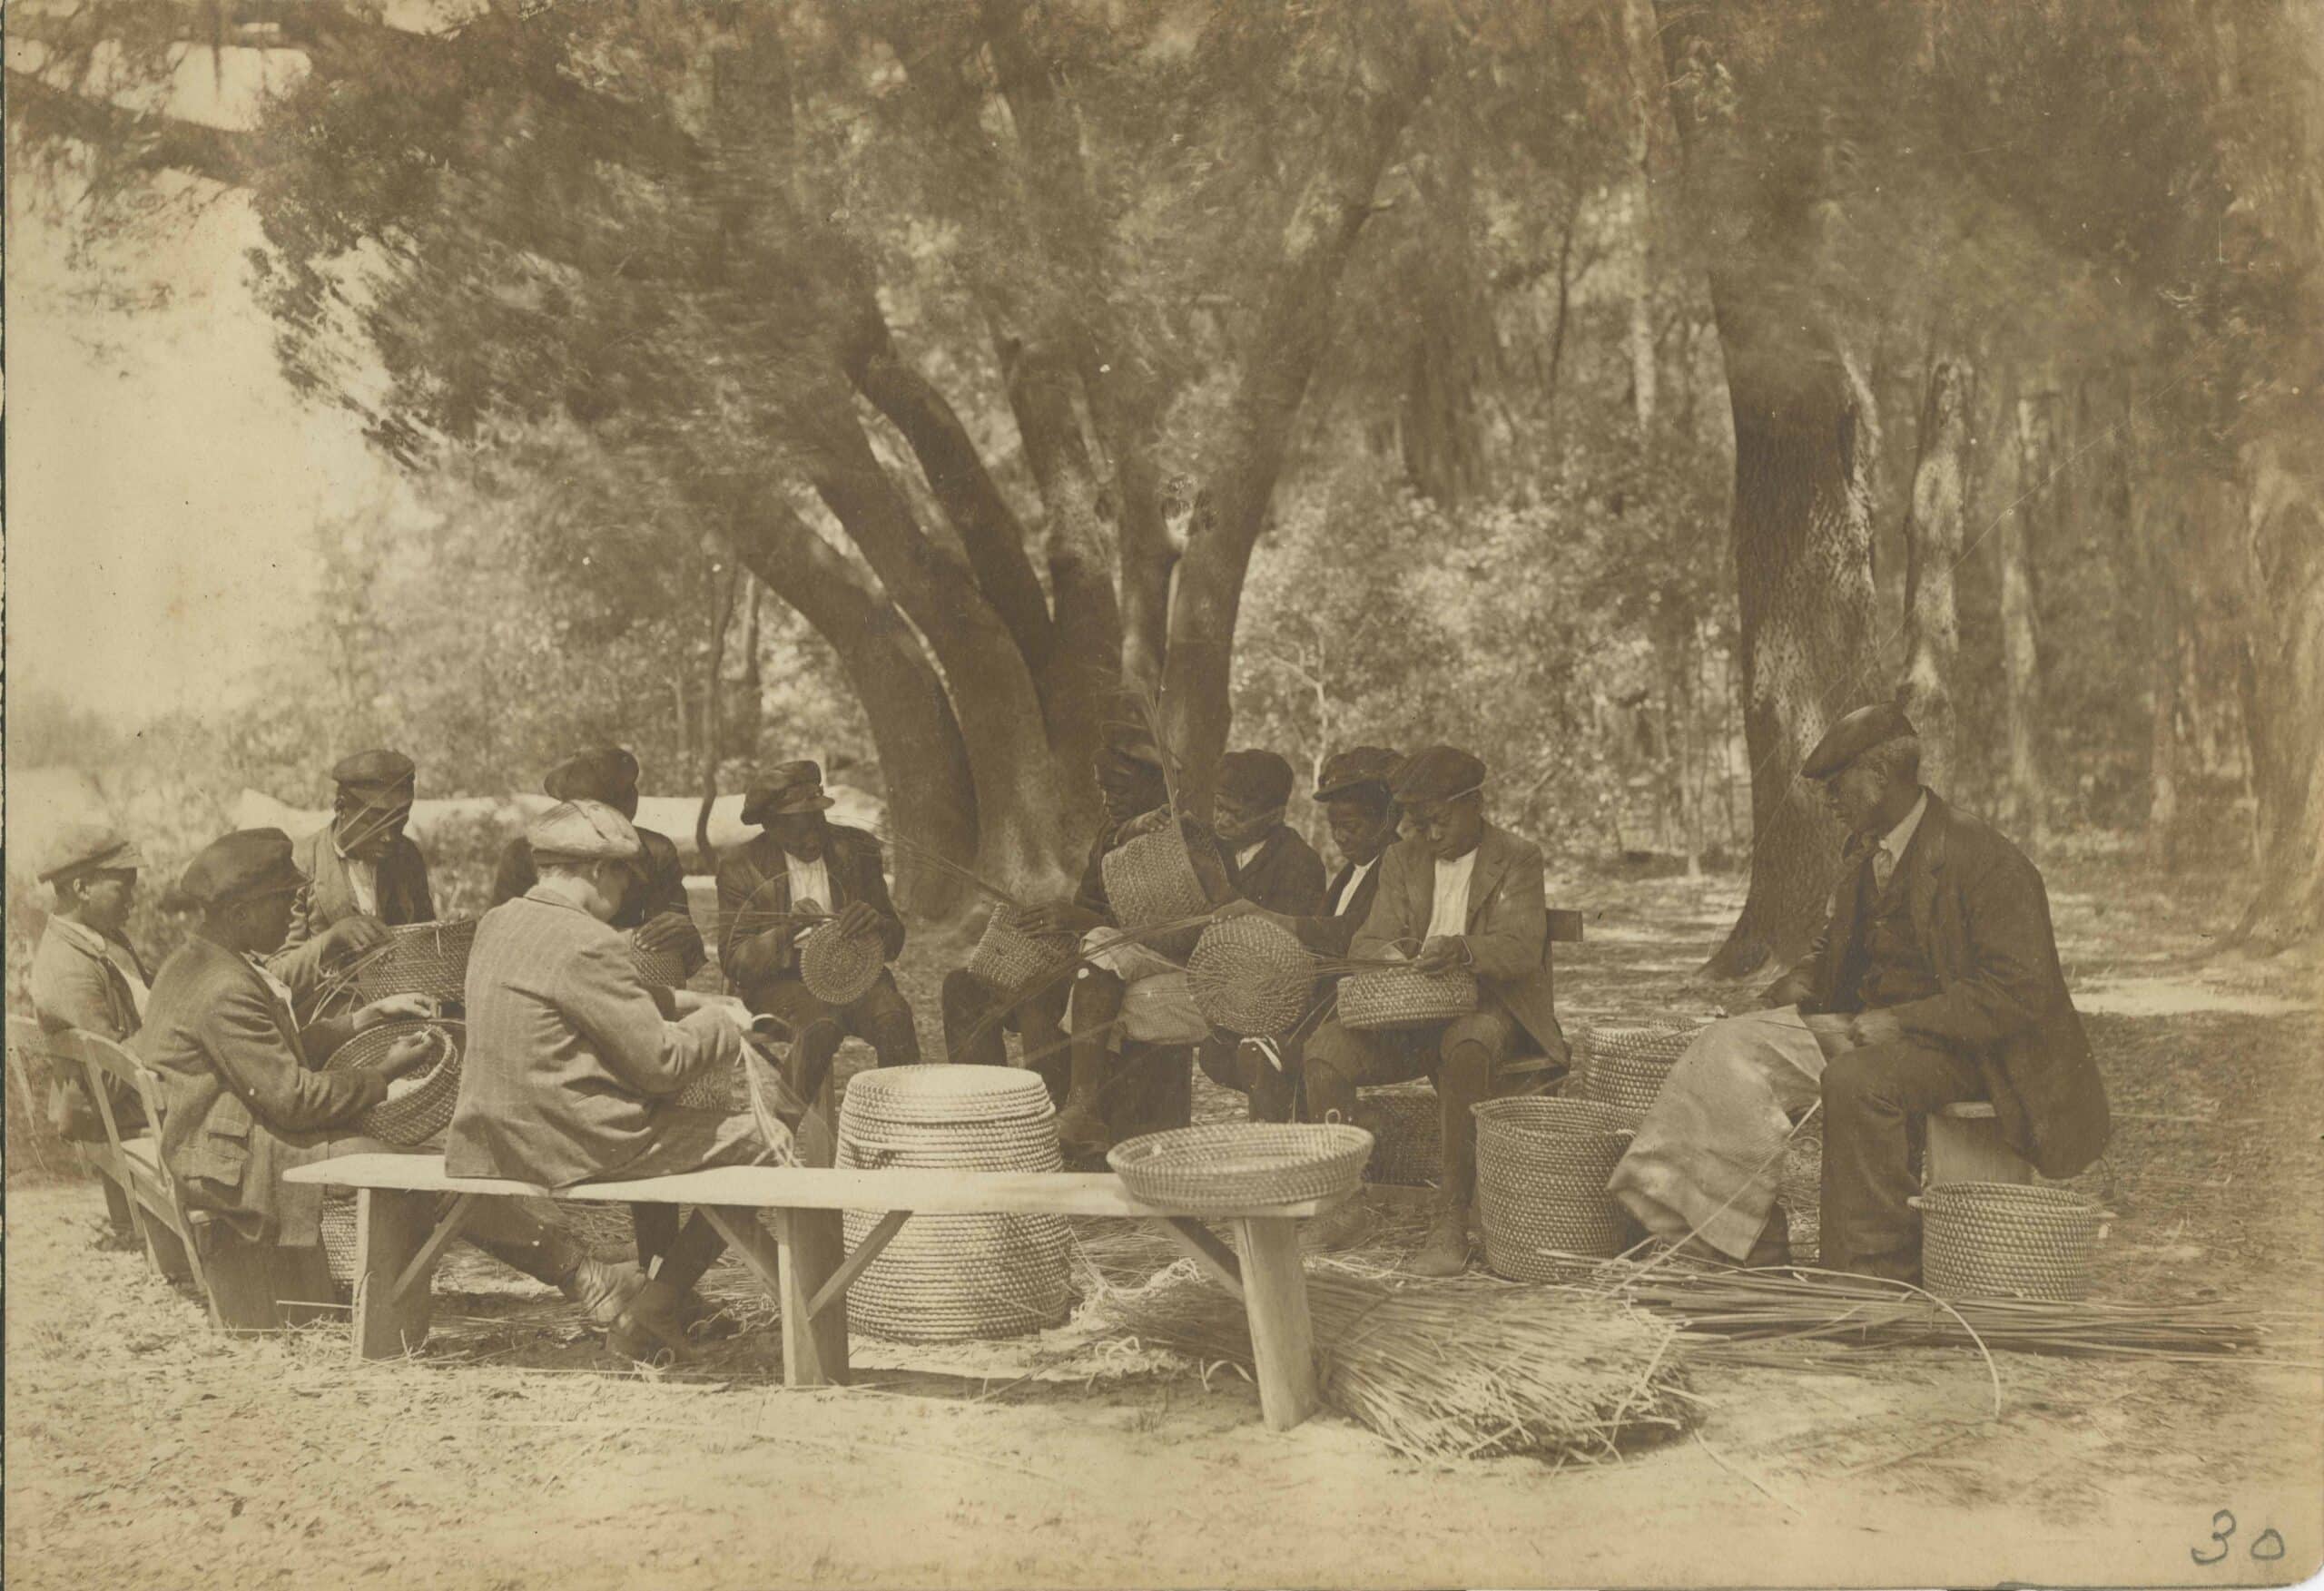 Penn Center campus outdoor basketry class in the 1800s